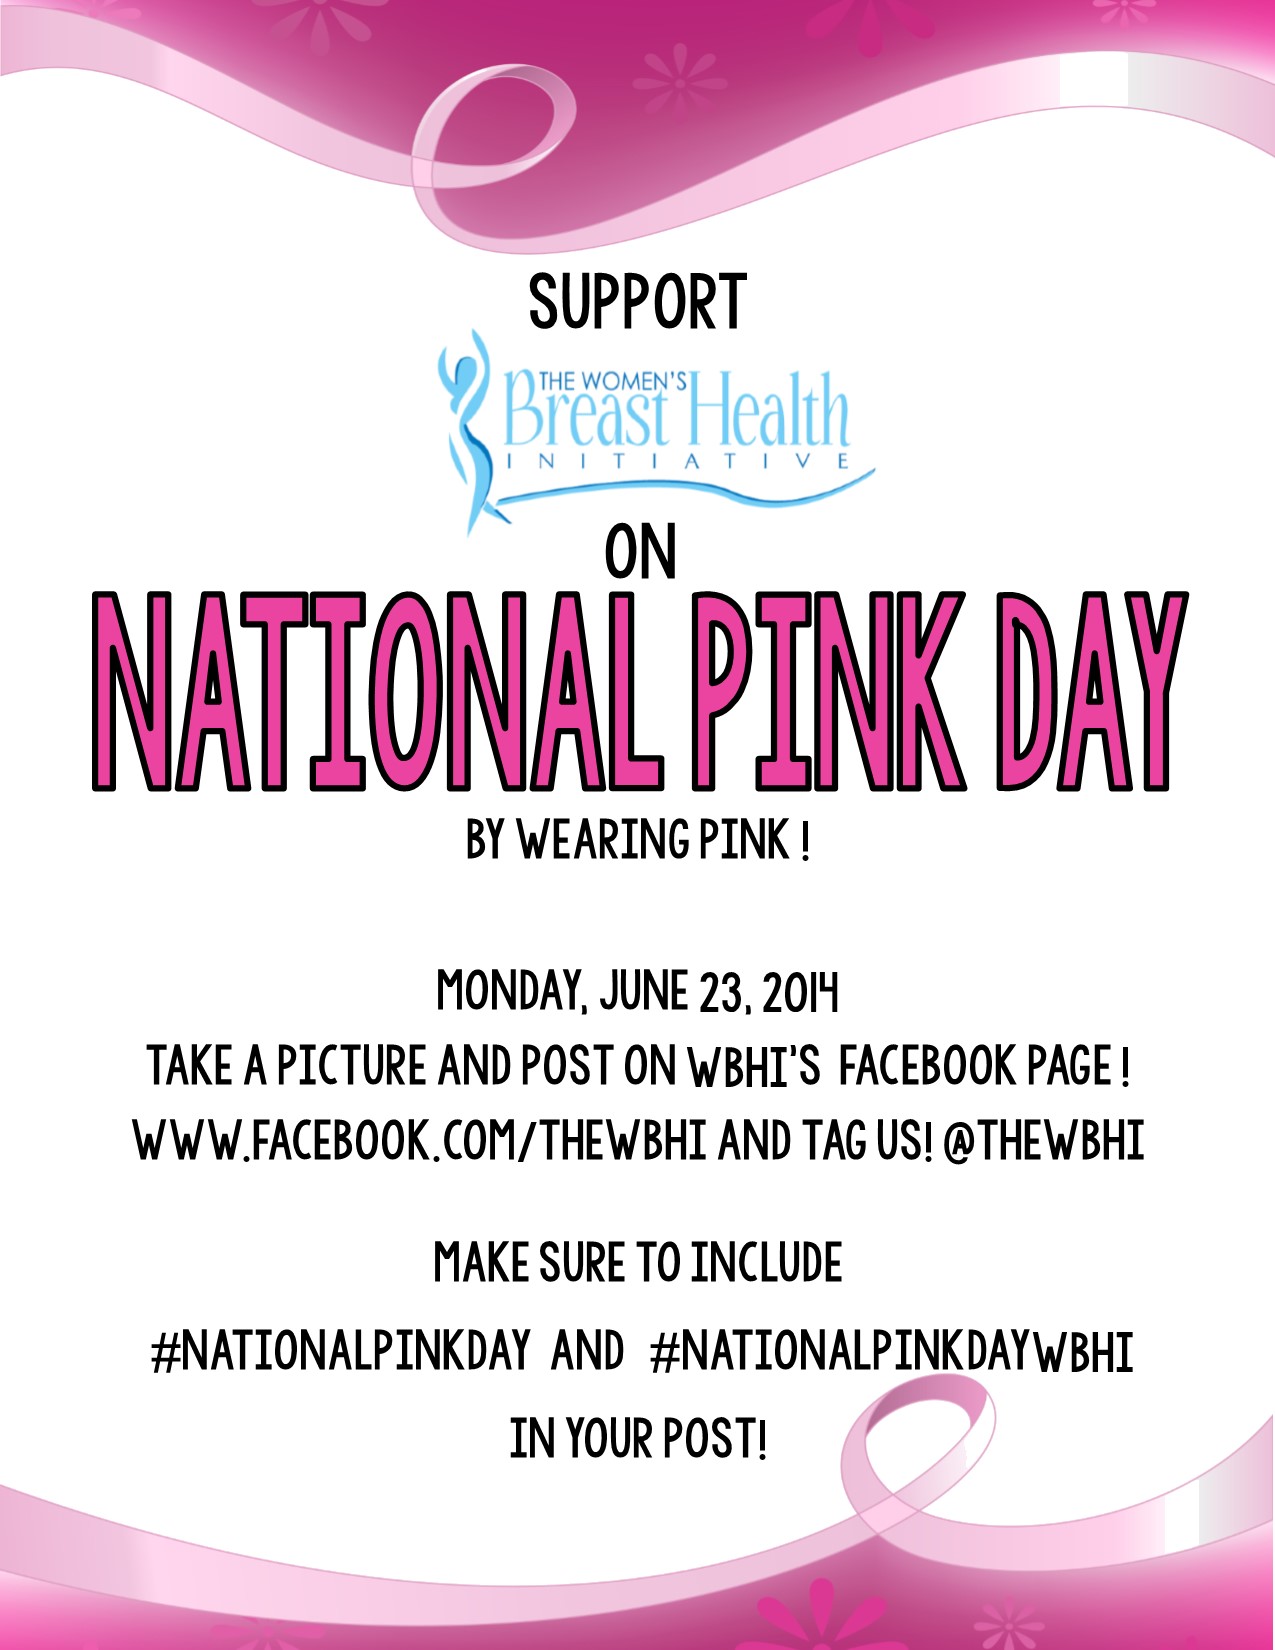 National Pink Day with The Women’s Breast Health Initiative 6/23/14